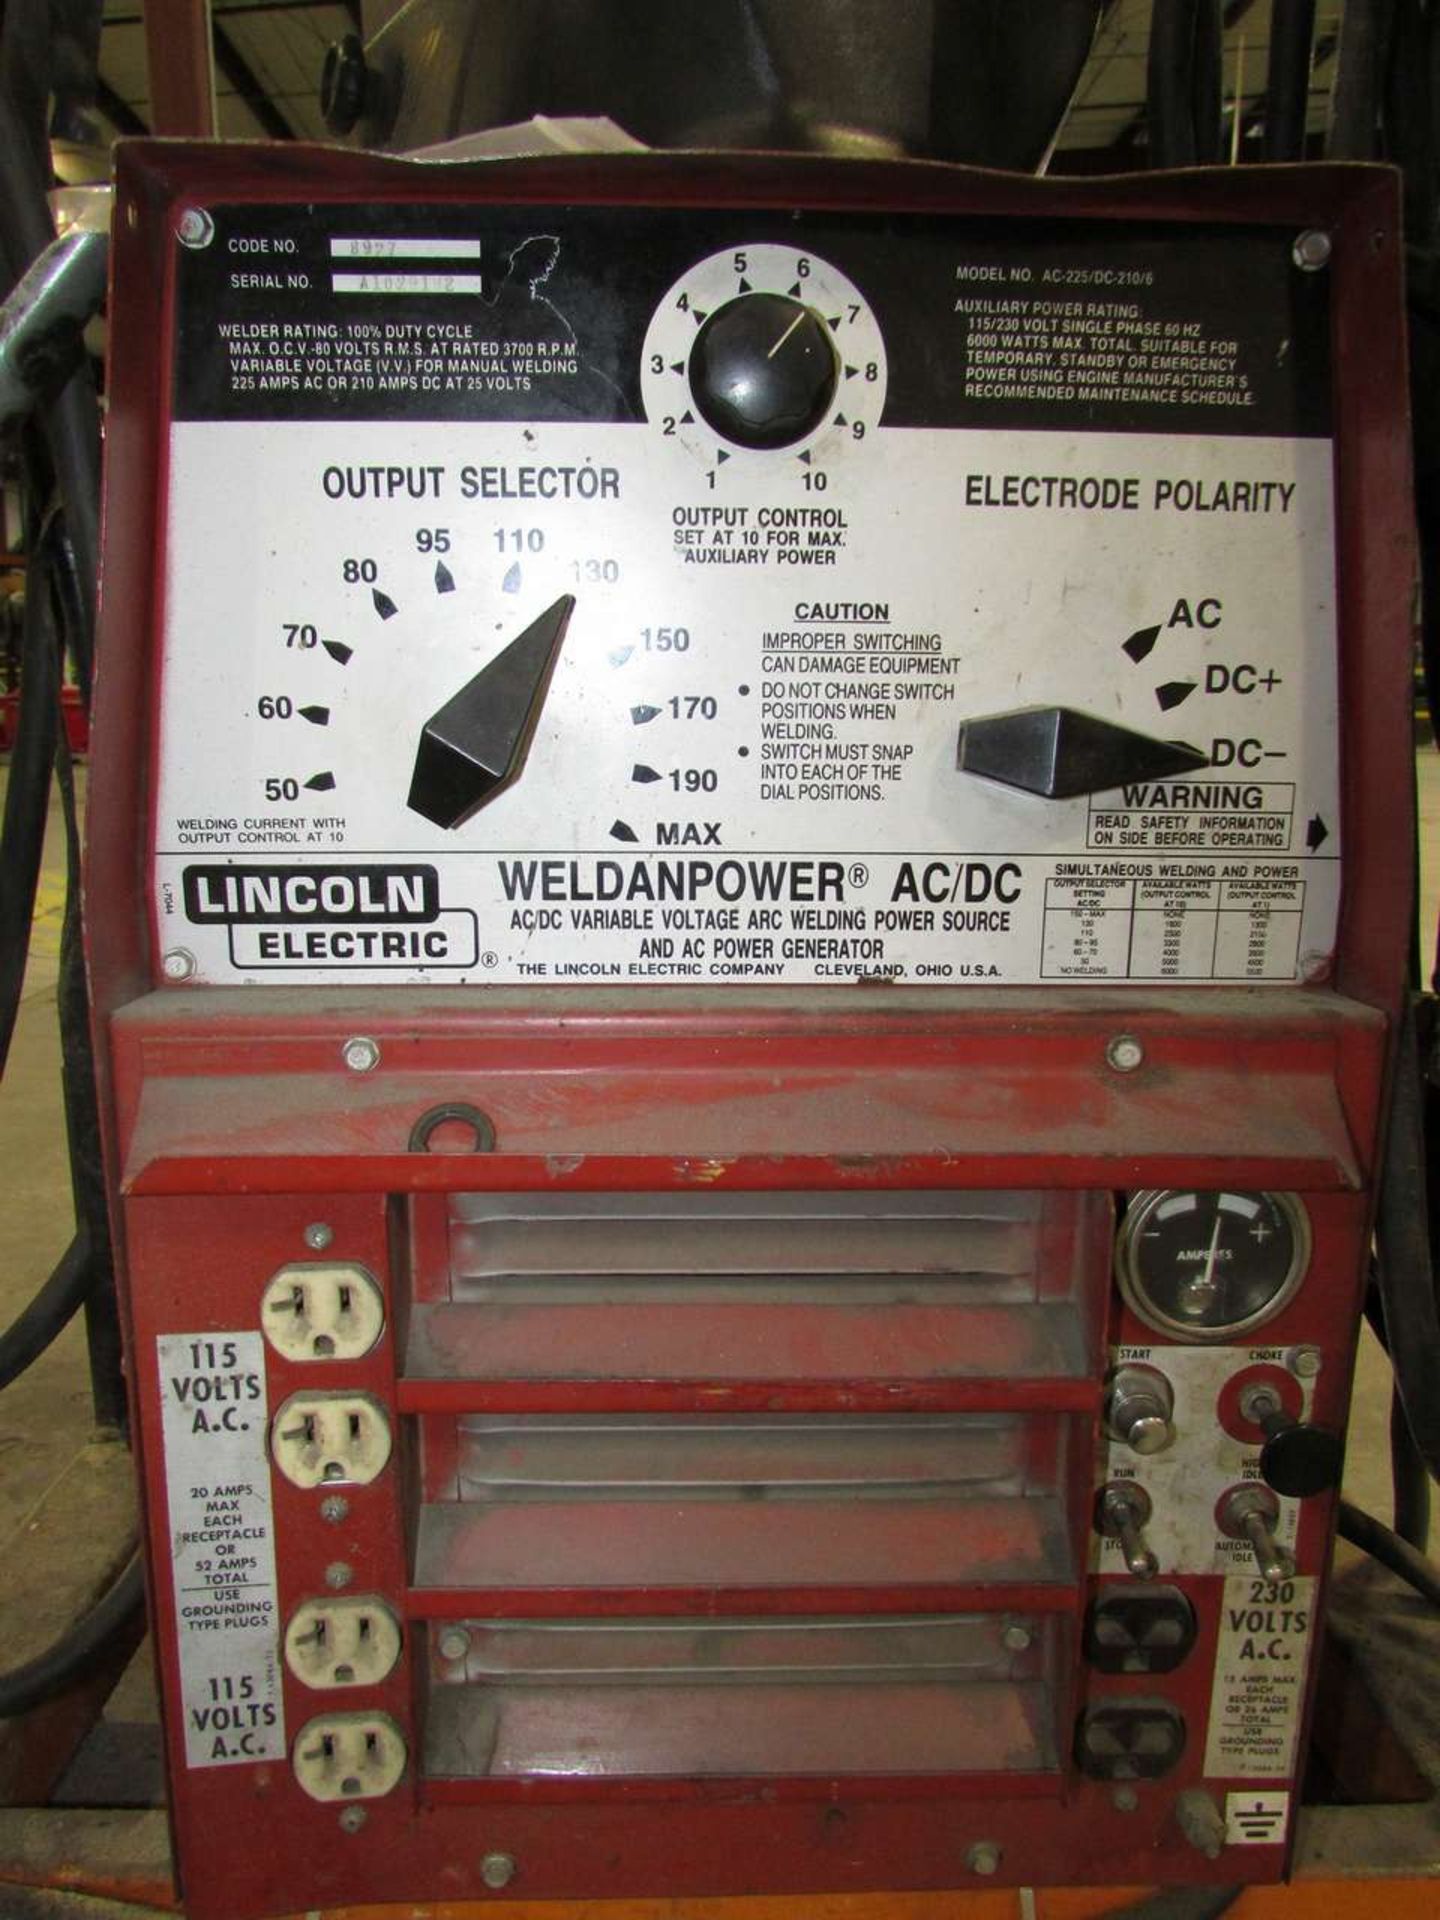 Lincoln Electric AC-225/DC-210/6 AC/DC Variable Voltage Arc Welding Power Source - Image 2 of 5